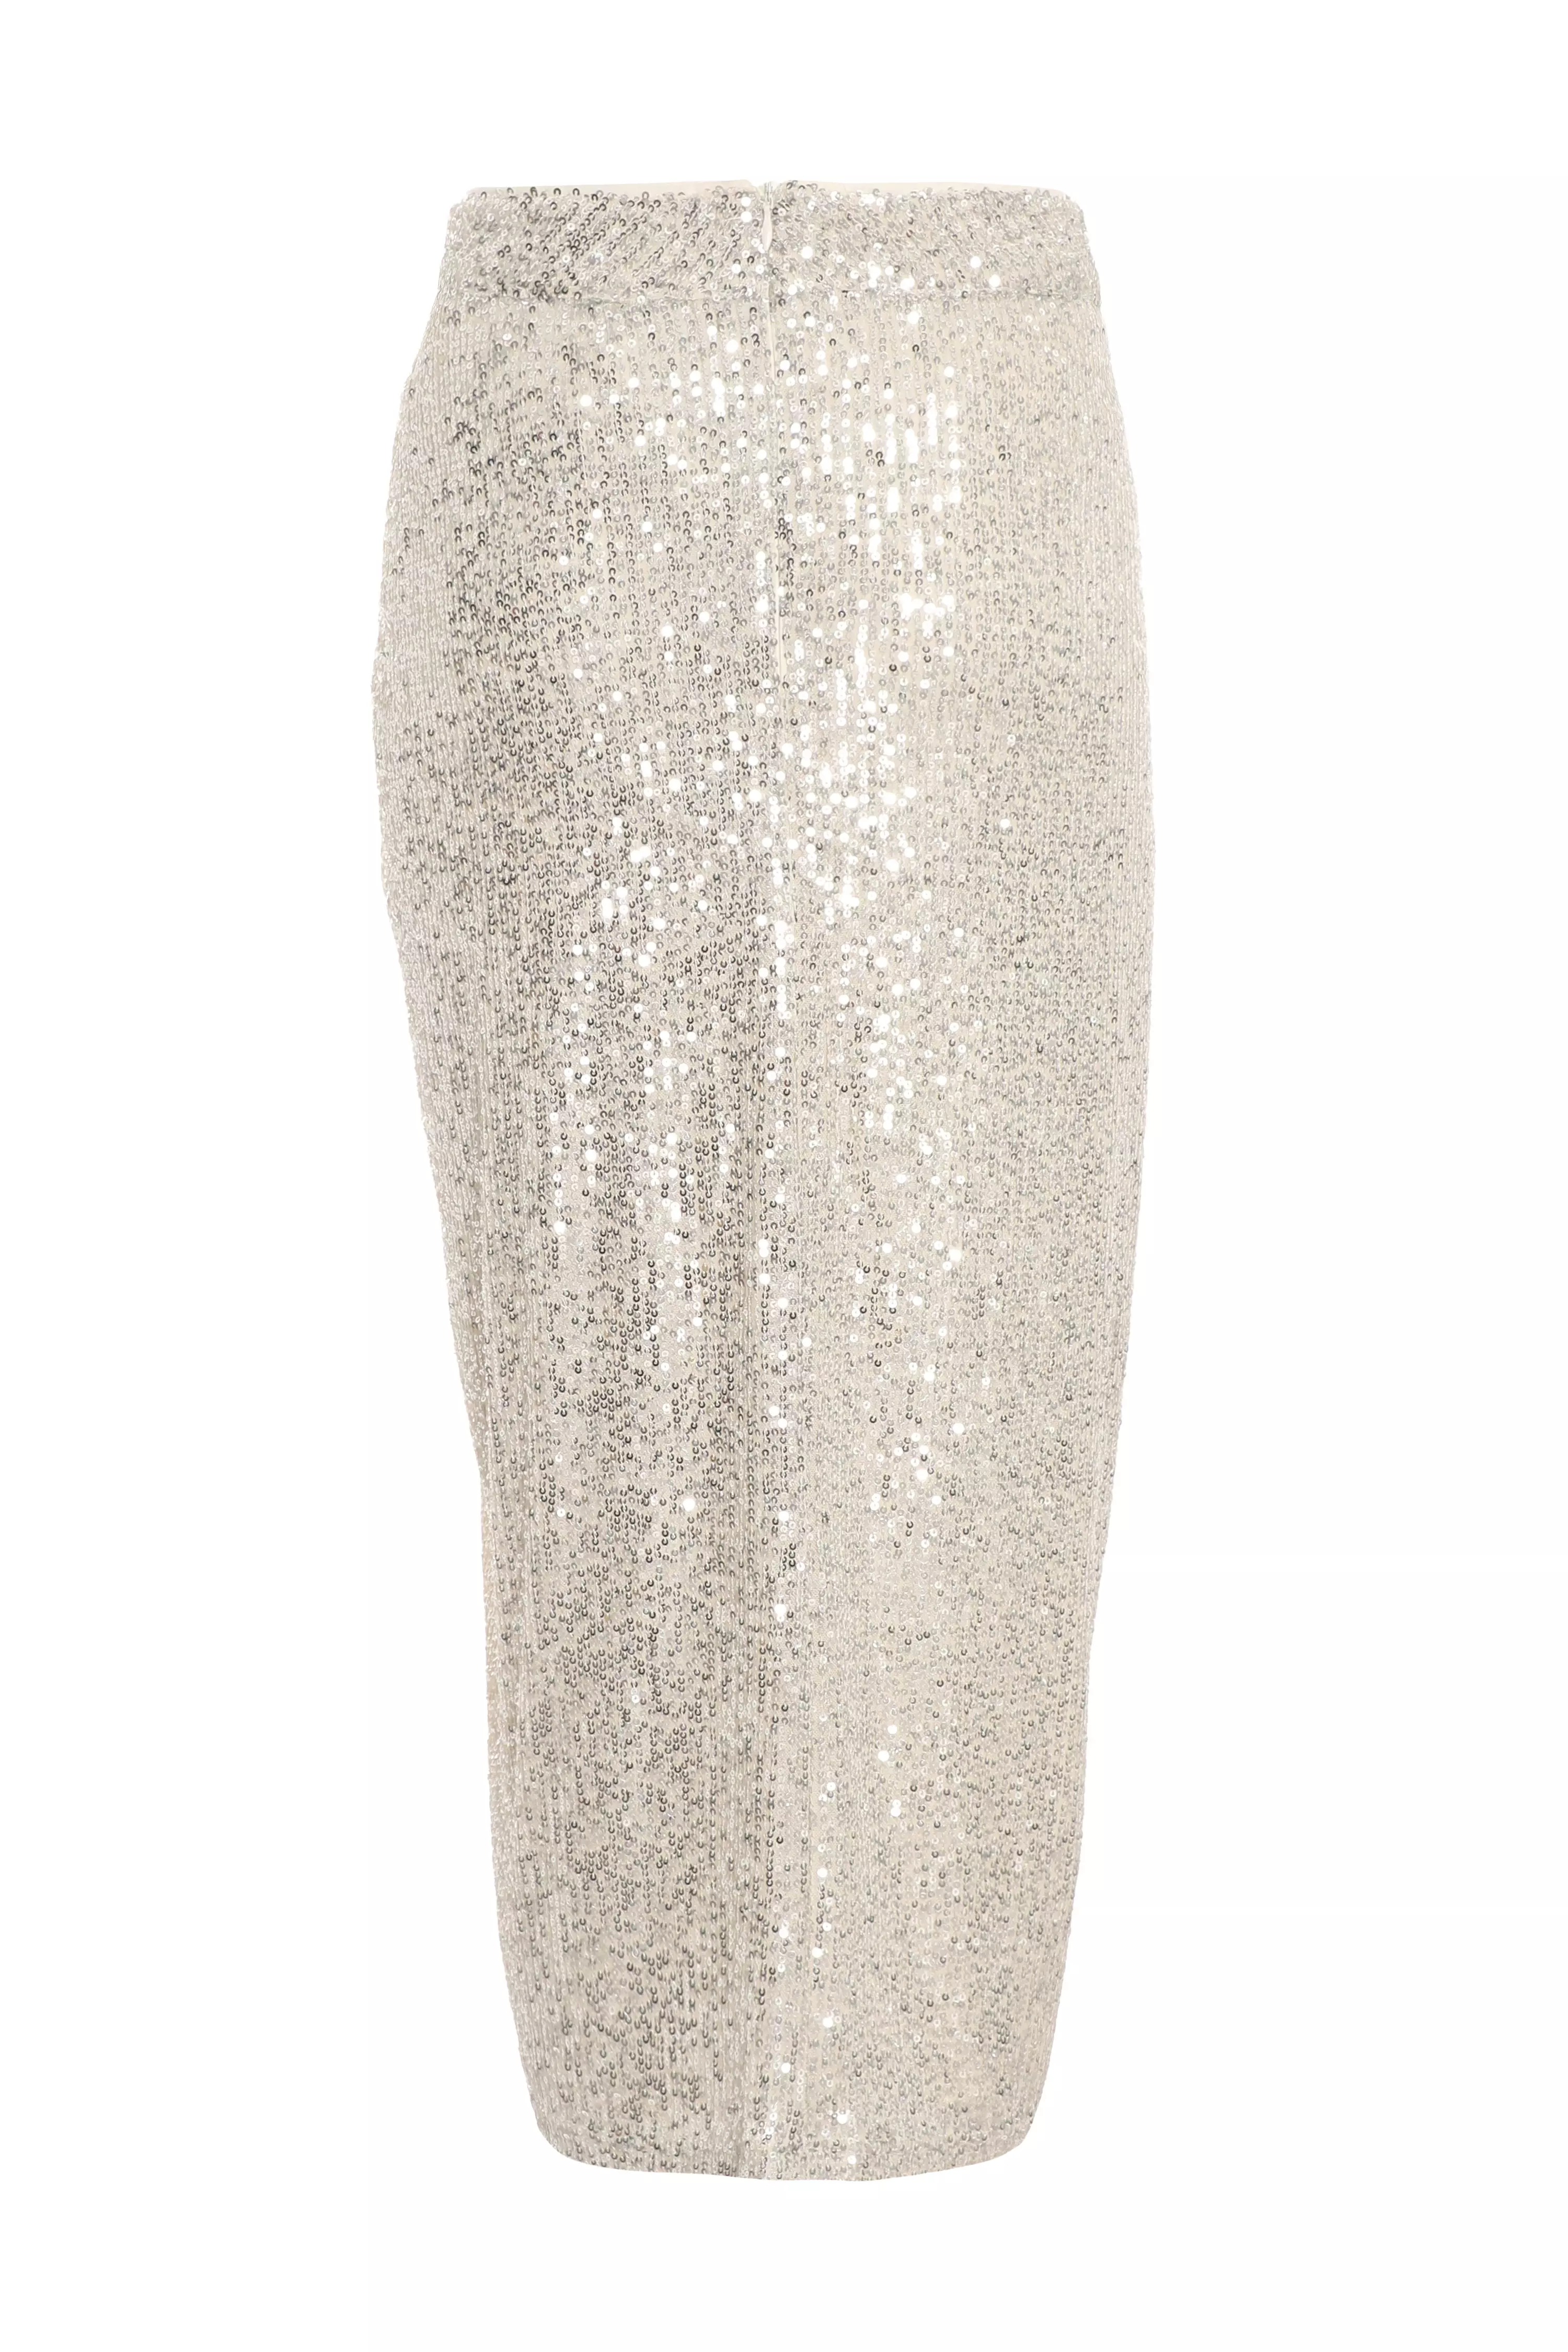 Champagne Sequin Ruched Midi Skirt - QUIZ Clothing